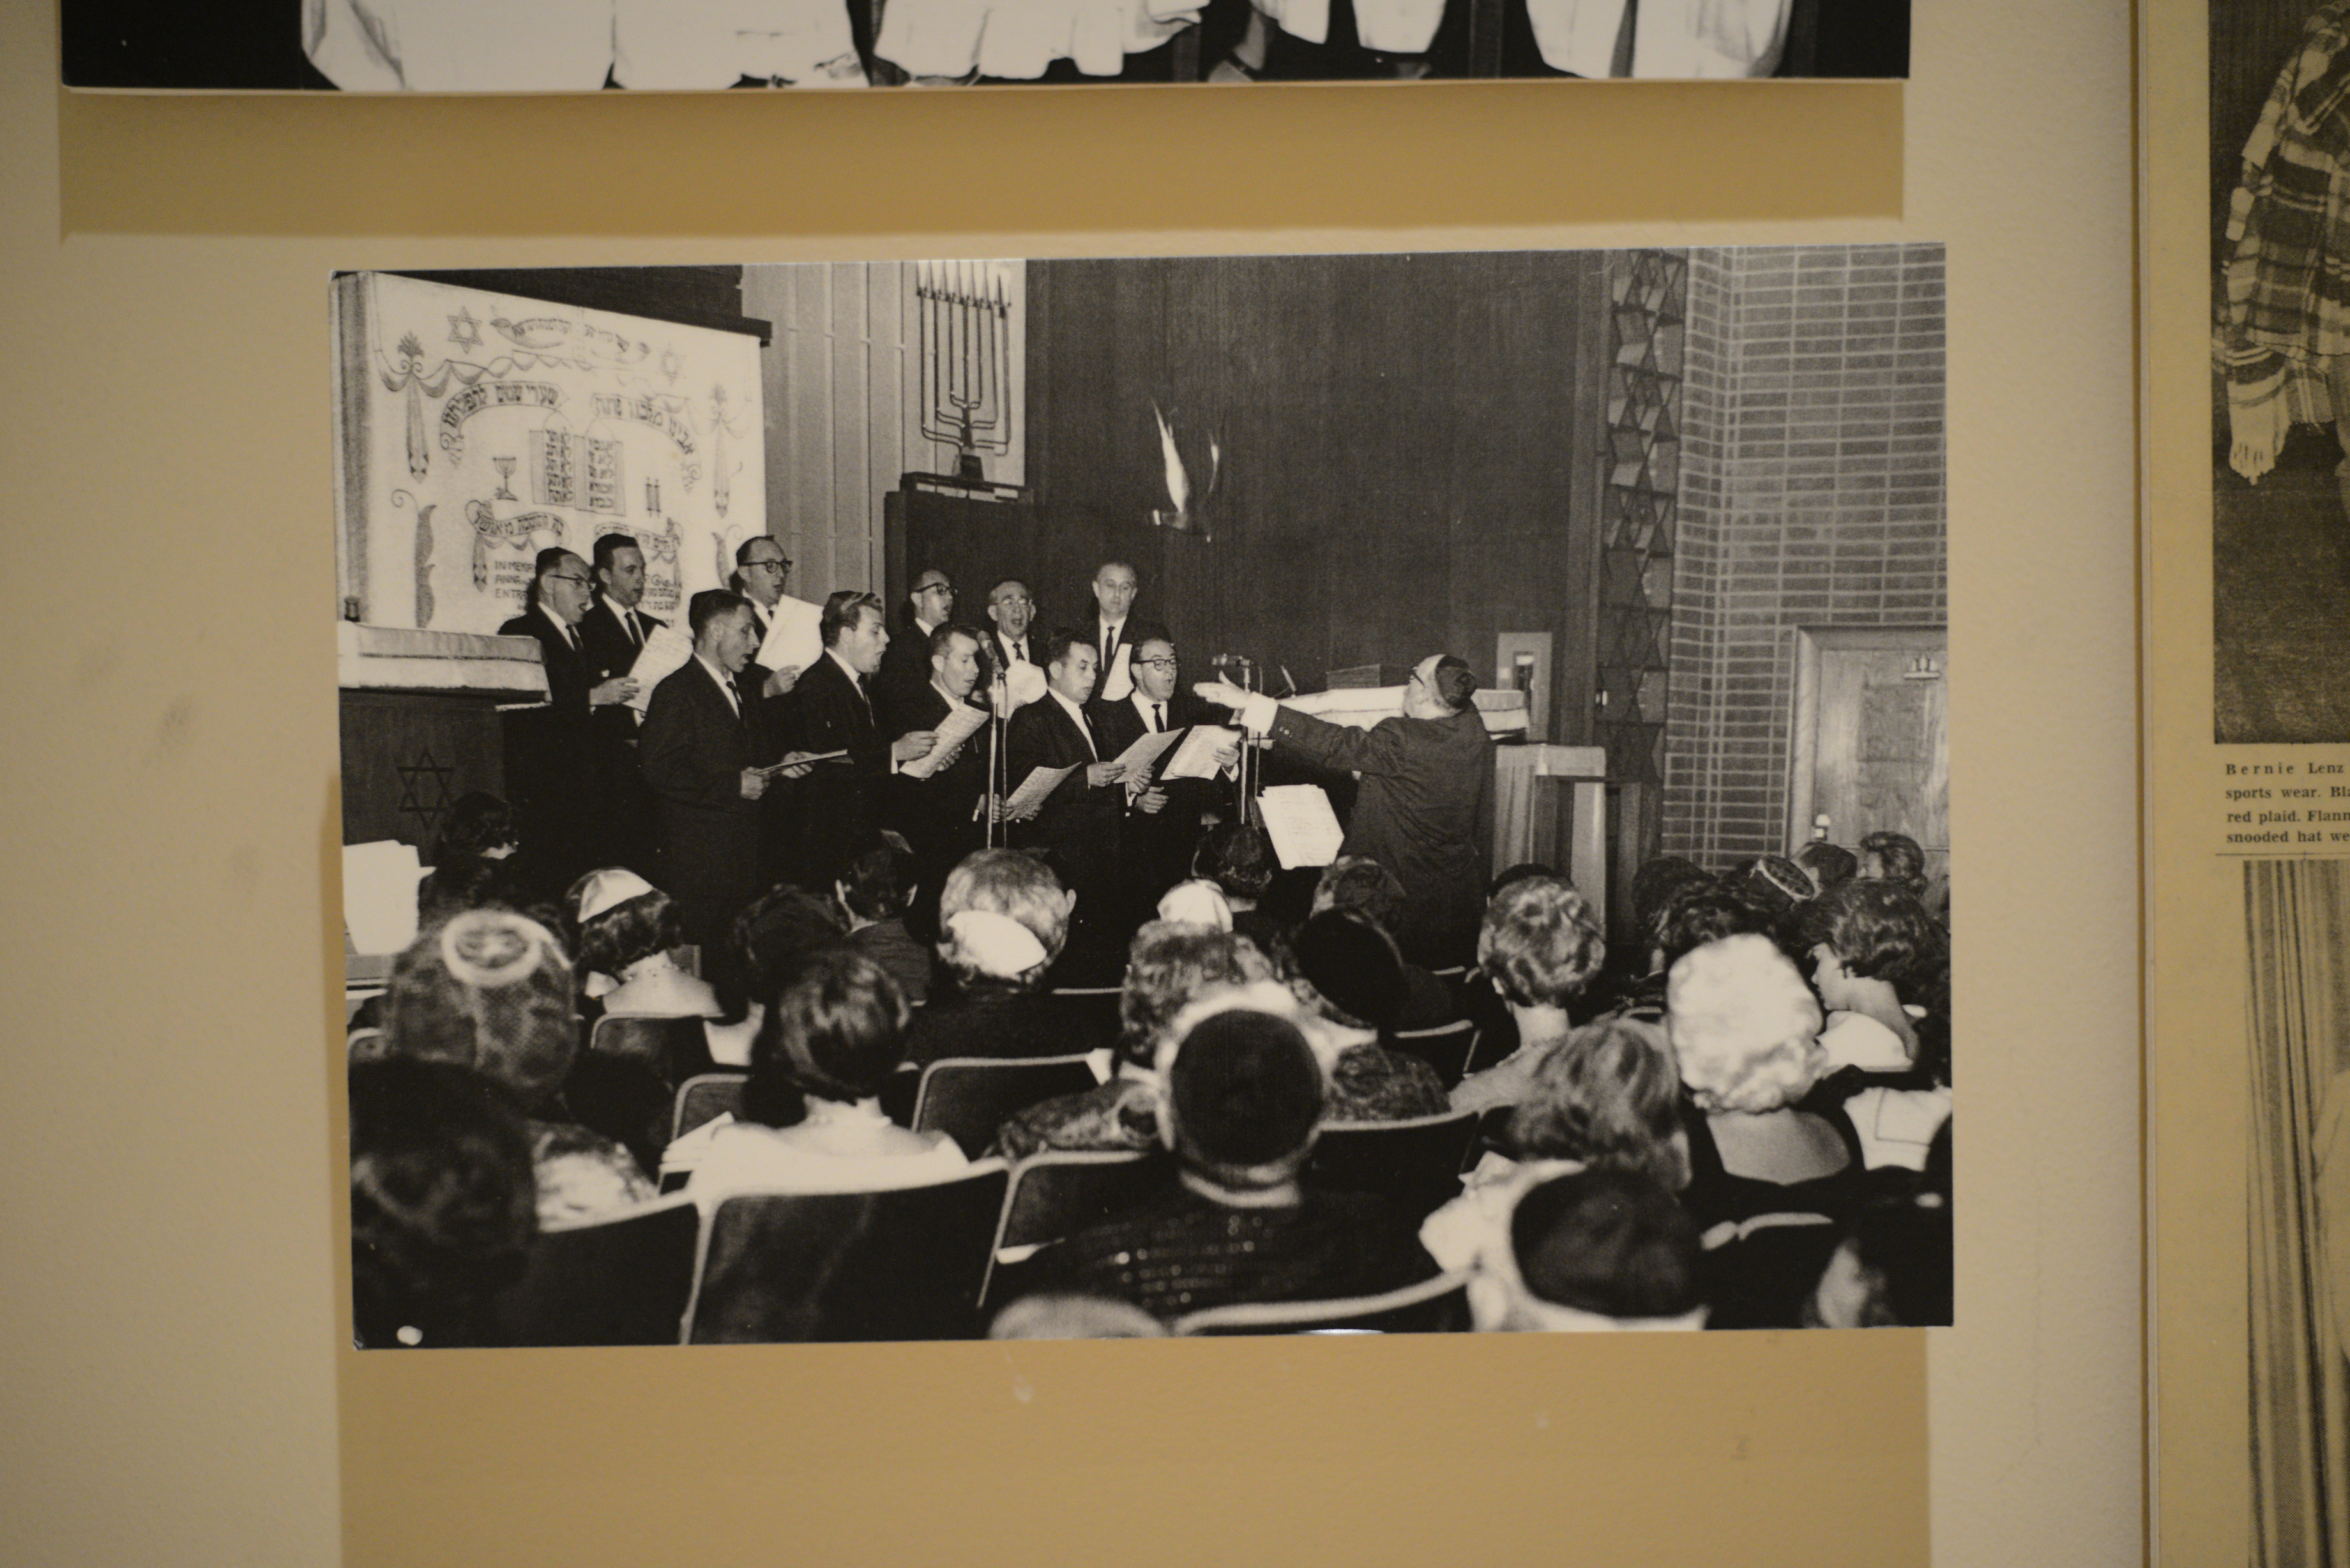 Photograph of a choir singing in temple, date unknown